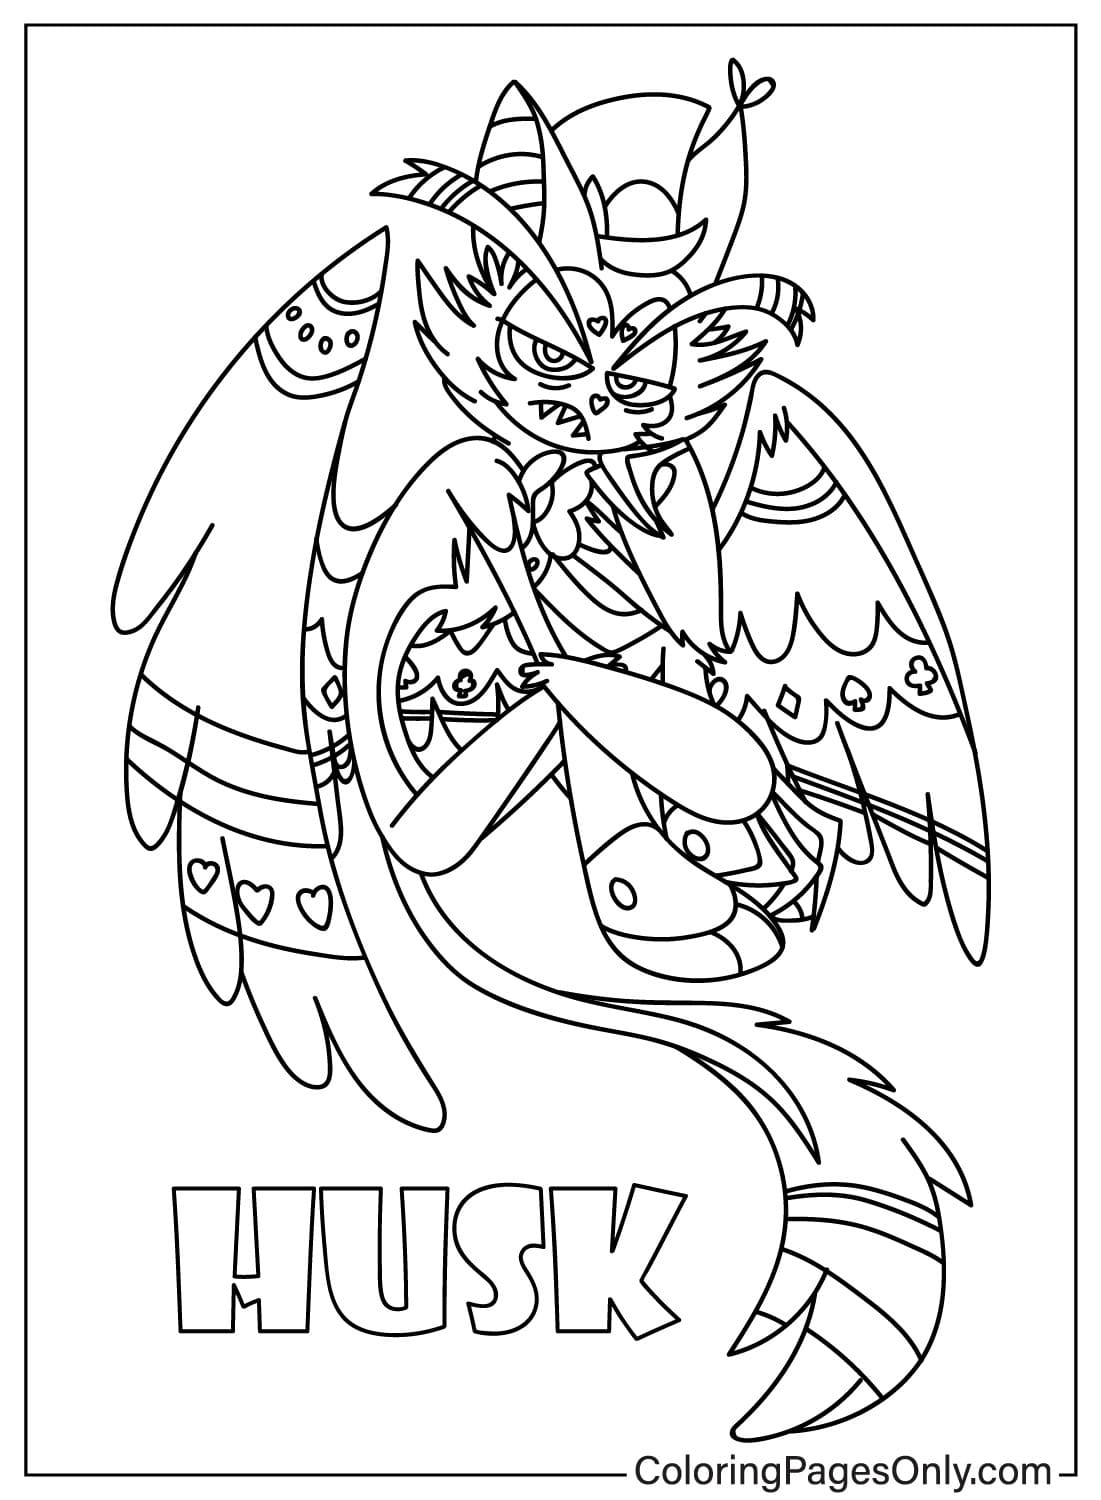 Husk Coloring Page from Husk